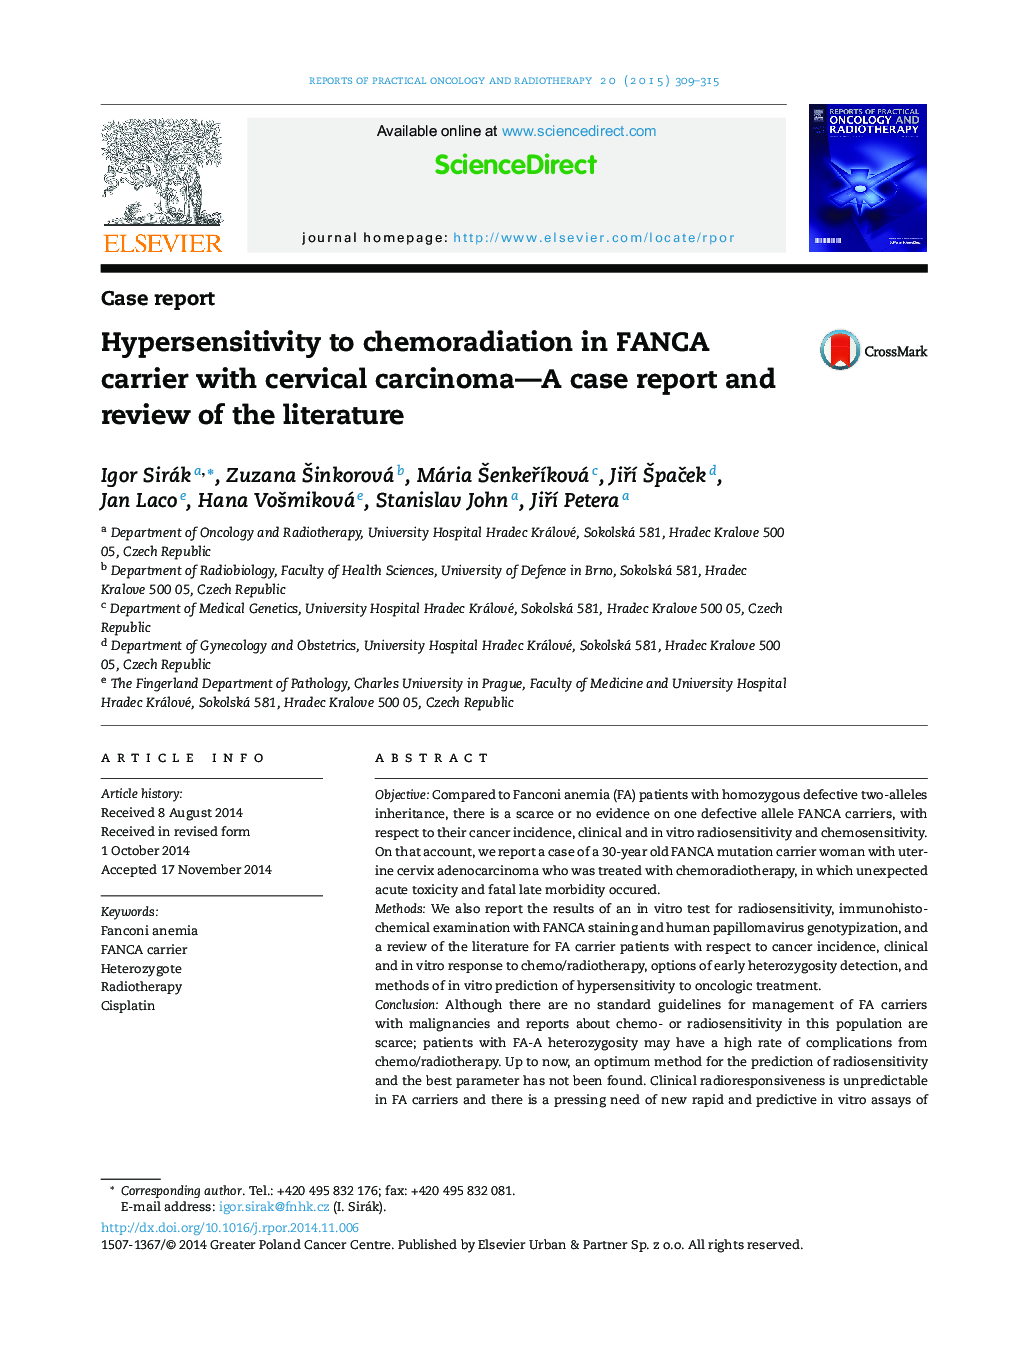 Hypersensitivity to chemoradiation in FANCA carrier with cervical carcinoma—A case report and review of the literature